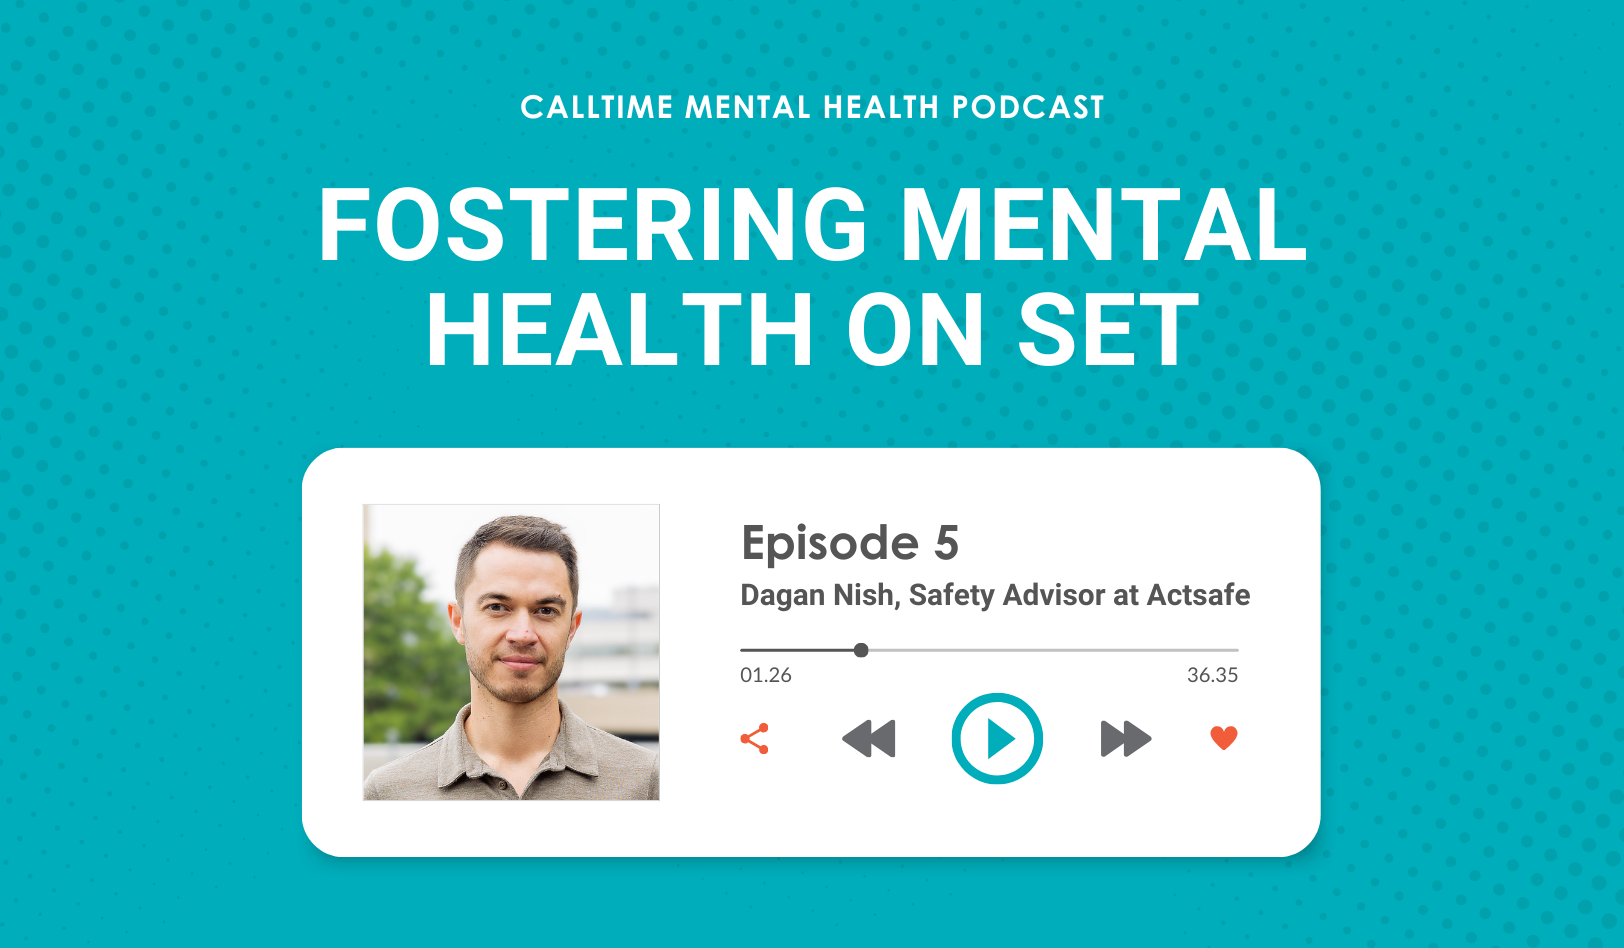 Podcast: Fostering Mental Health on Set